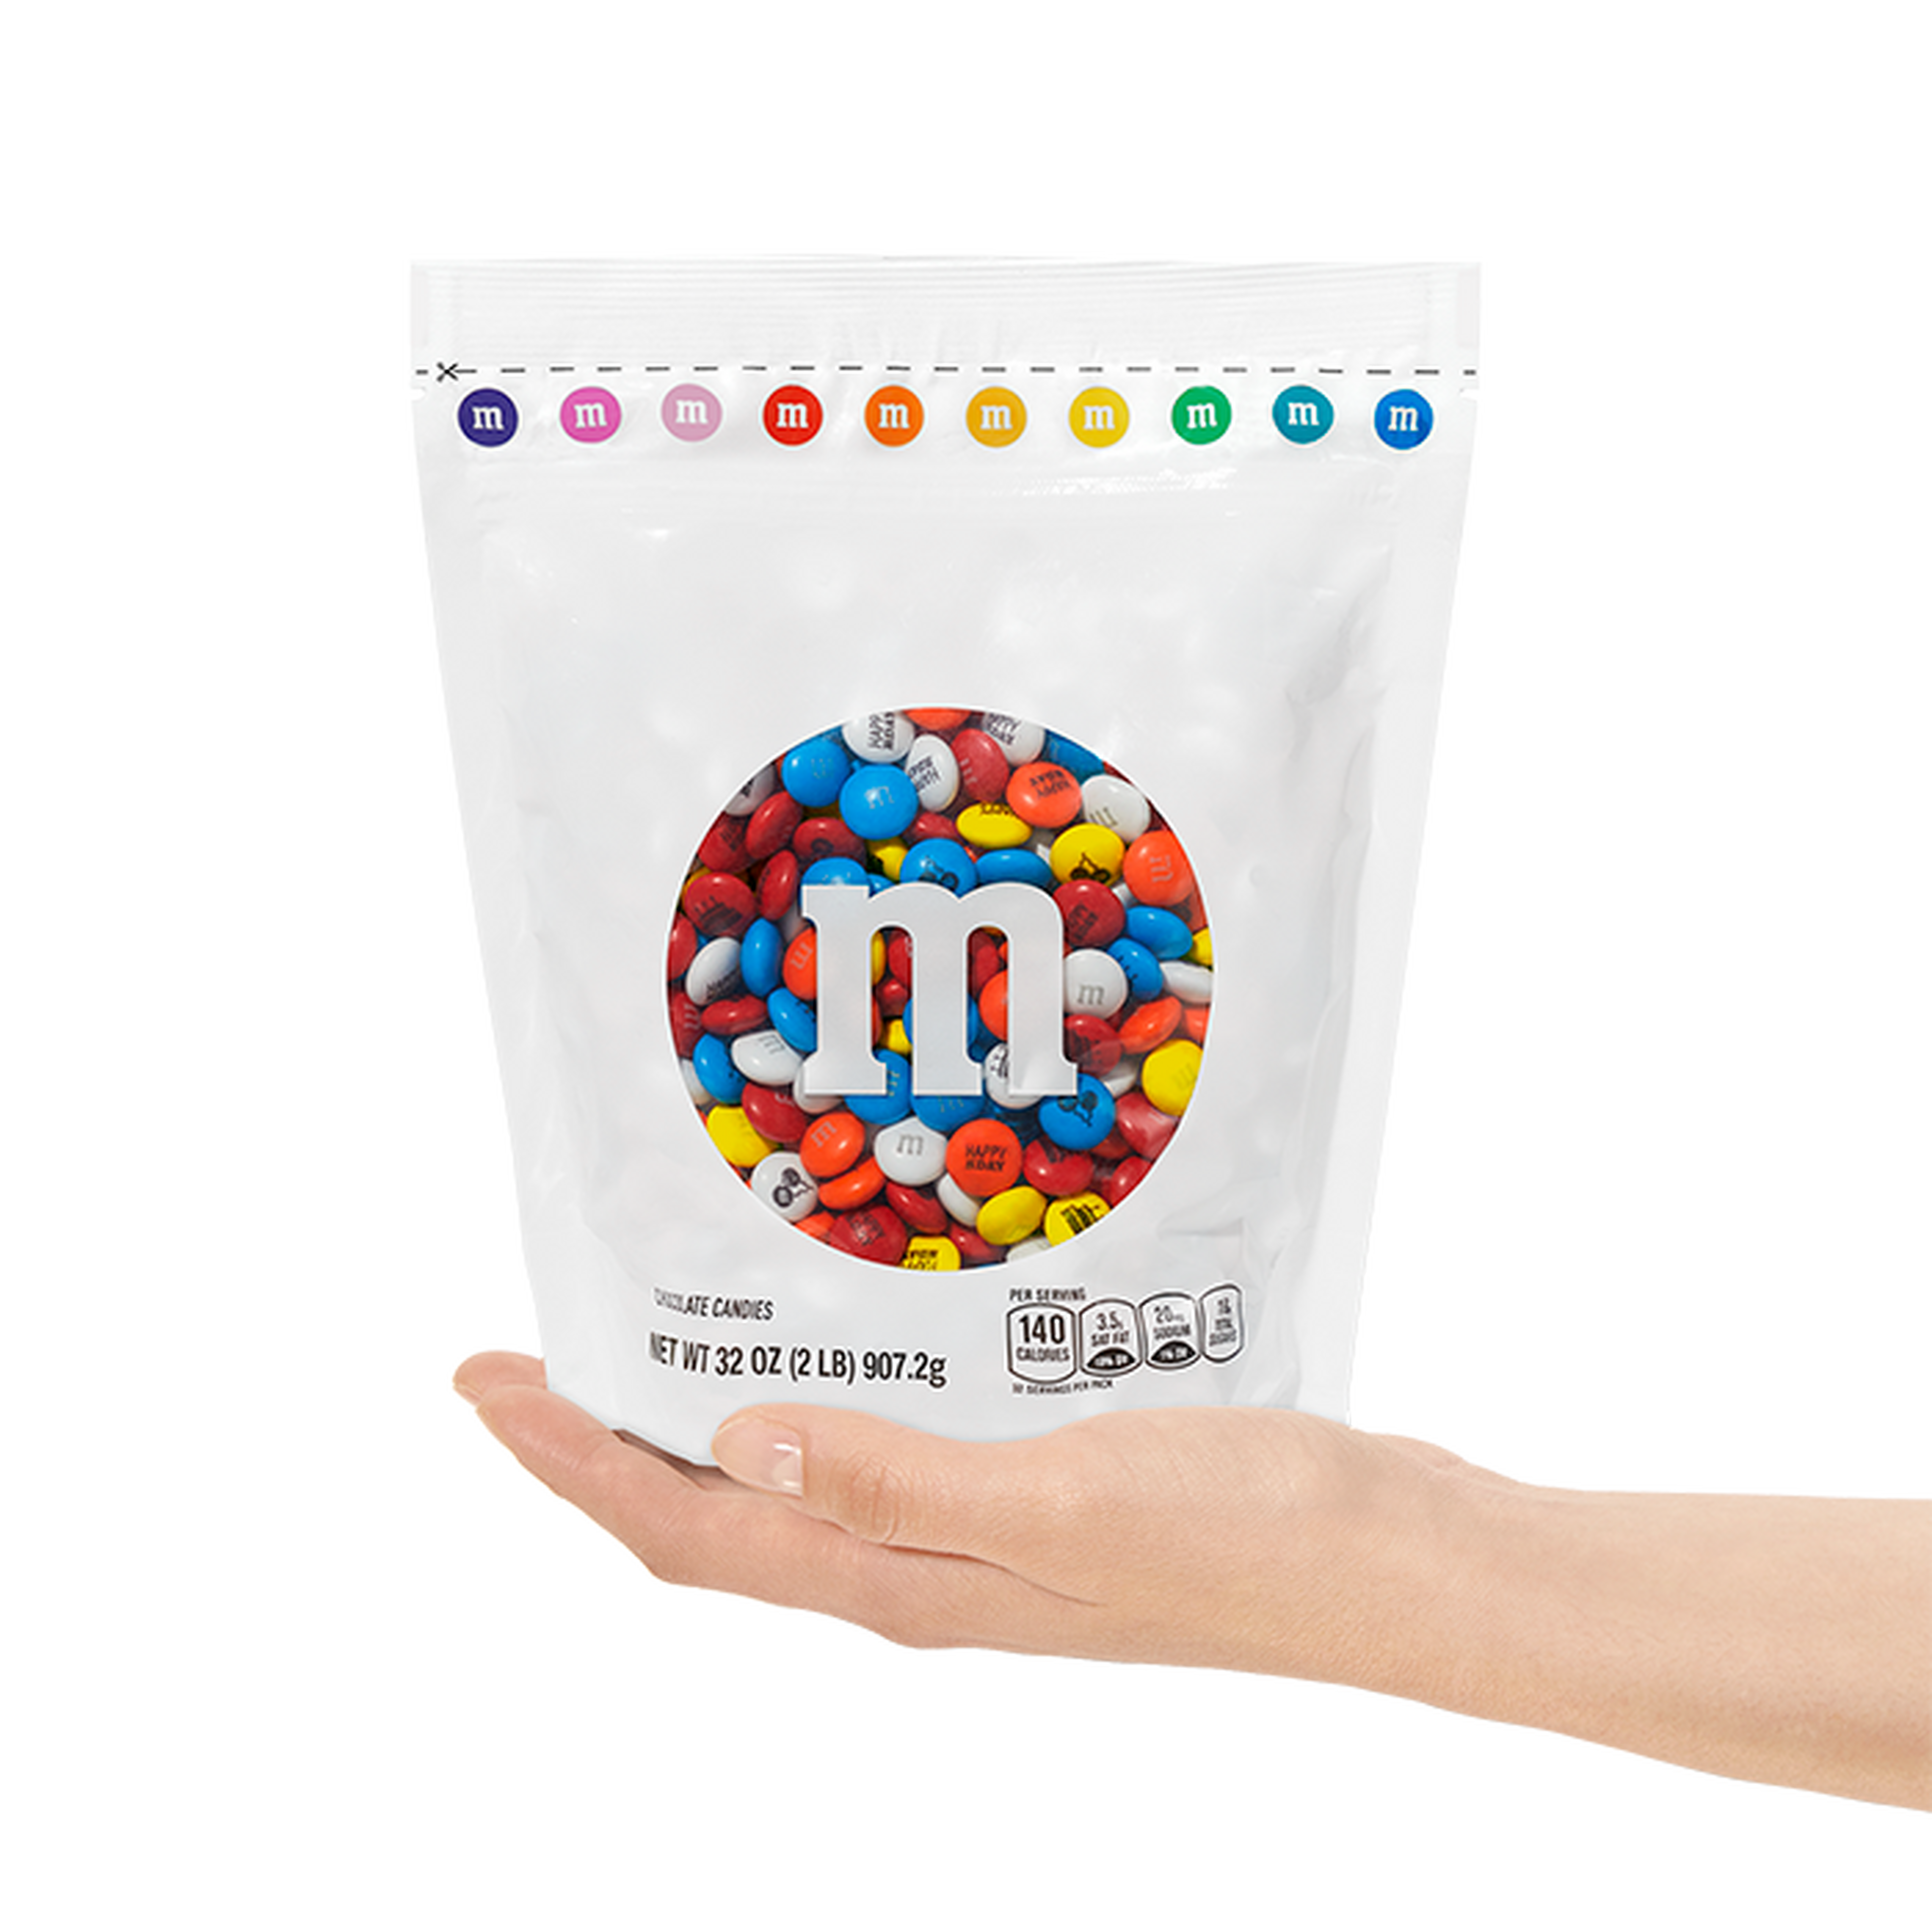 M&M'S Milk Chocolate Candy Family Size Resealable Bulk Candy Bag